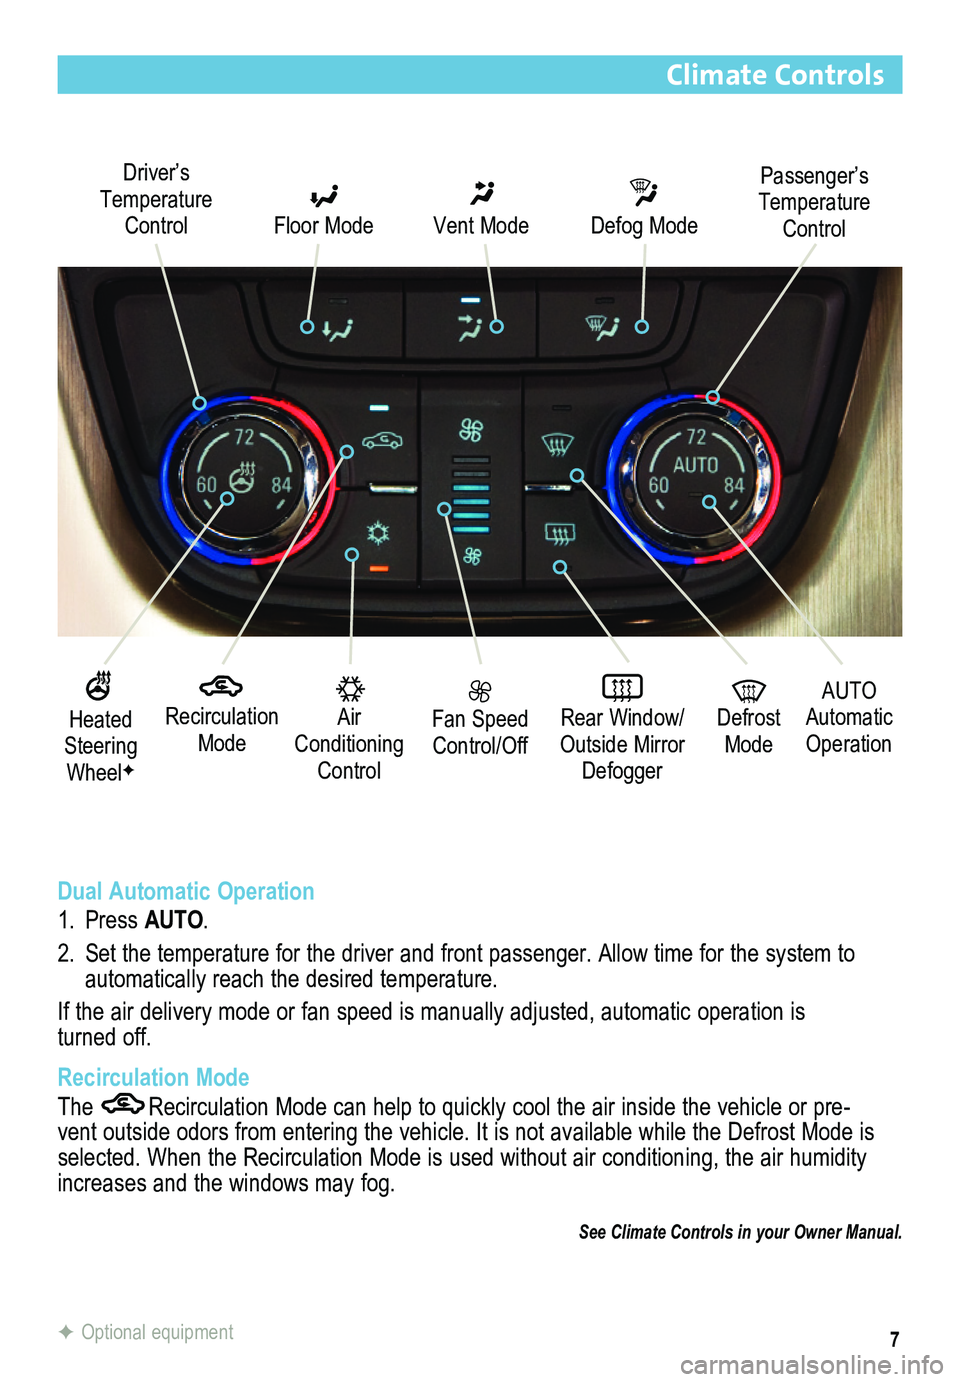 BUICK ENCLAVE 2013  Get To Know Guide 7
Climate Controls
 
Recirculation Mode
Driver’s Temperature Control  Floor Mode
 Vent Mode
 Defog Mode
 Fan Speed Control/Off
 Rear Window/ Outside Mirror Defogger
  Air Conditioning Control
AUTO 
